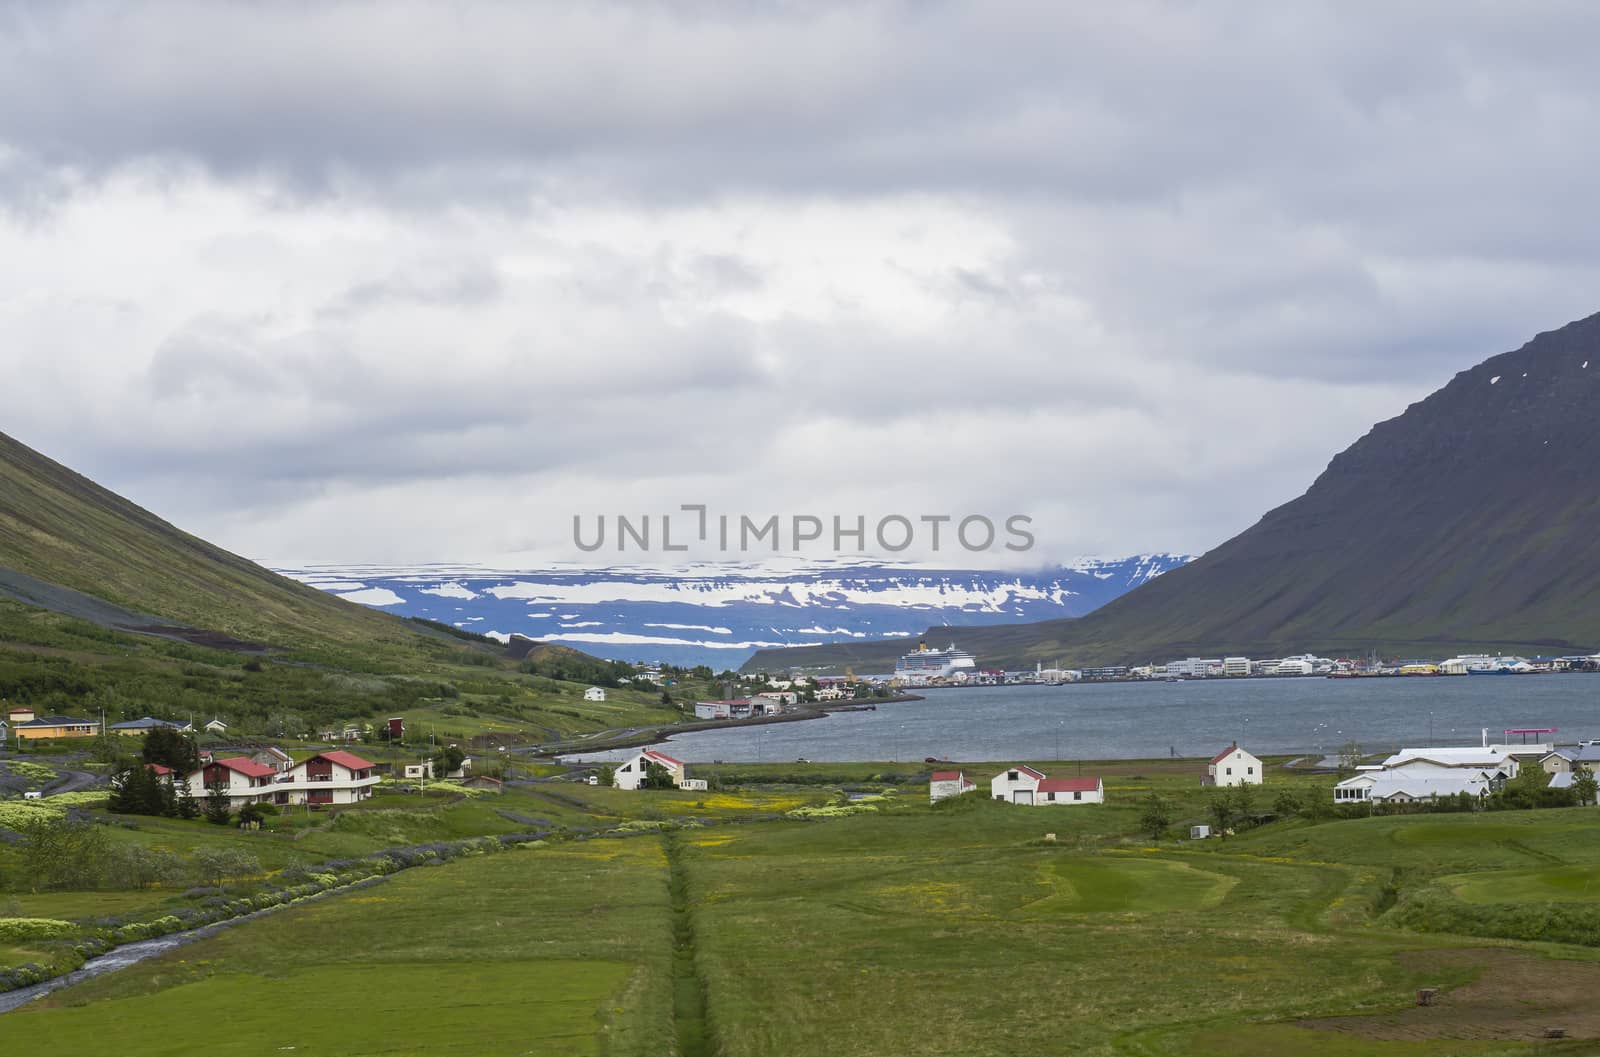 Beautiful view on Isafjordur city, capital of west fjords of Iceland in summer with red houses, harbor with ships and yachts, green grass and farm landscape, blue snow covered mountains background